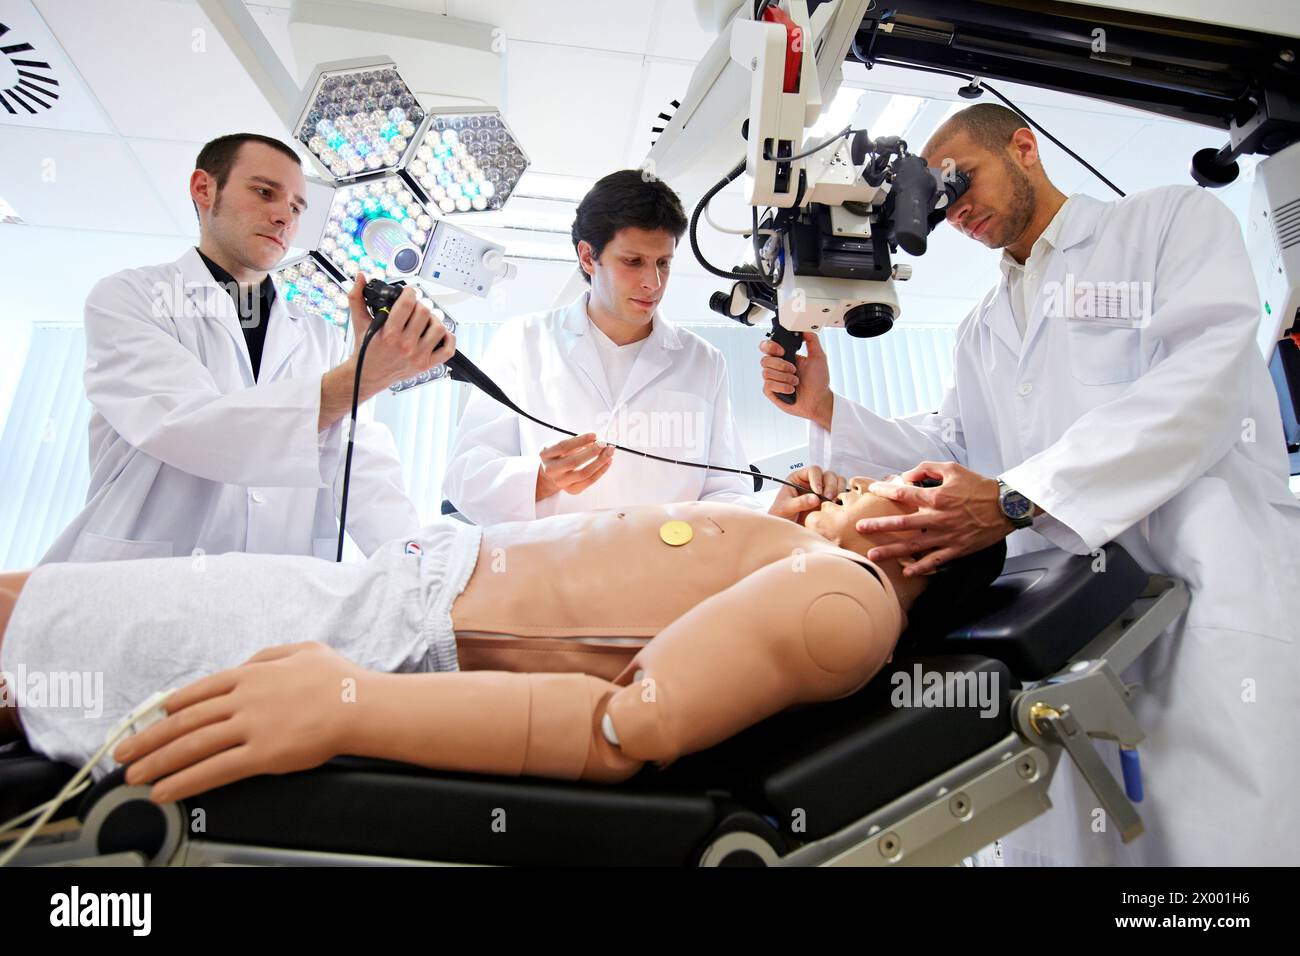 Integrated operating room, bronchoscopy simulation, examination of the airways, Health and Biomedical applications, Vicomtech-IK4 Visual Interaction and Communication Technologies Centre, applied research centre for Interactive Computer Graphics and Multimedia, San Sebastian Technology Park, Donostia, Gipuzkoa, Euskadi, Spain. Stock Photo